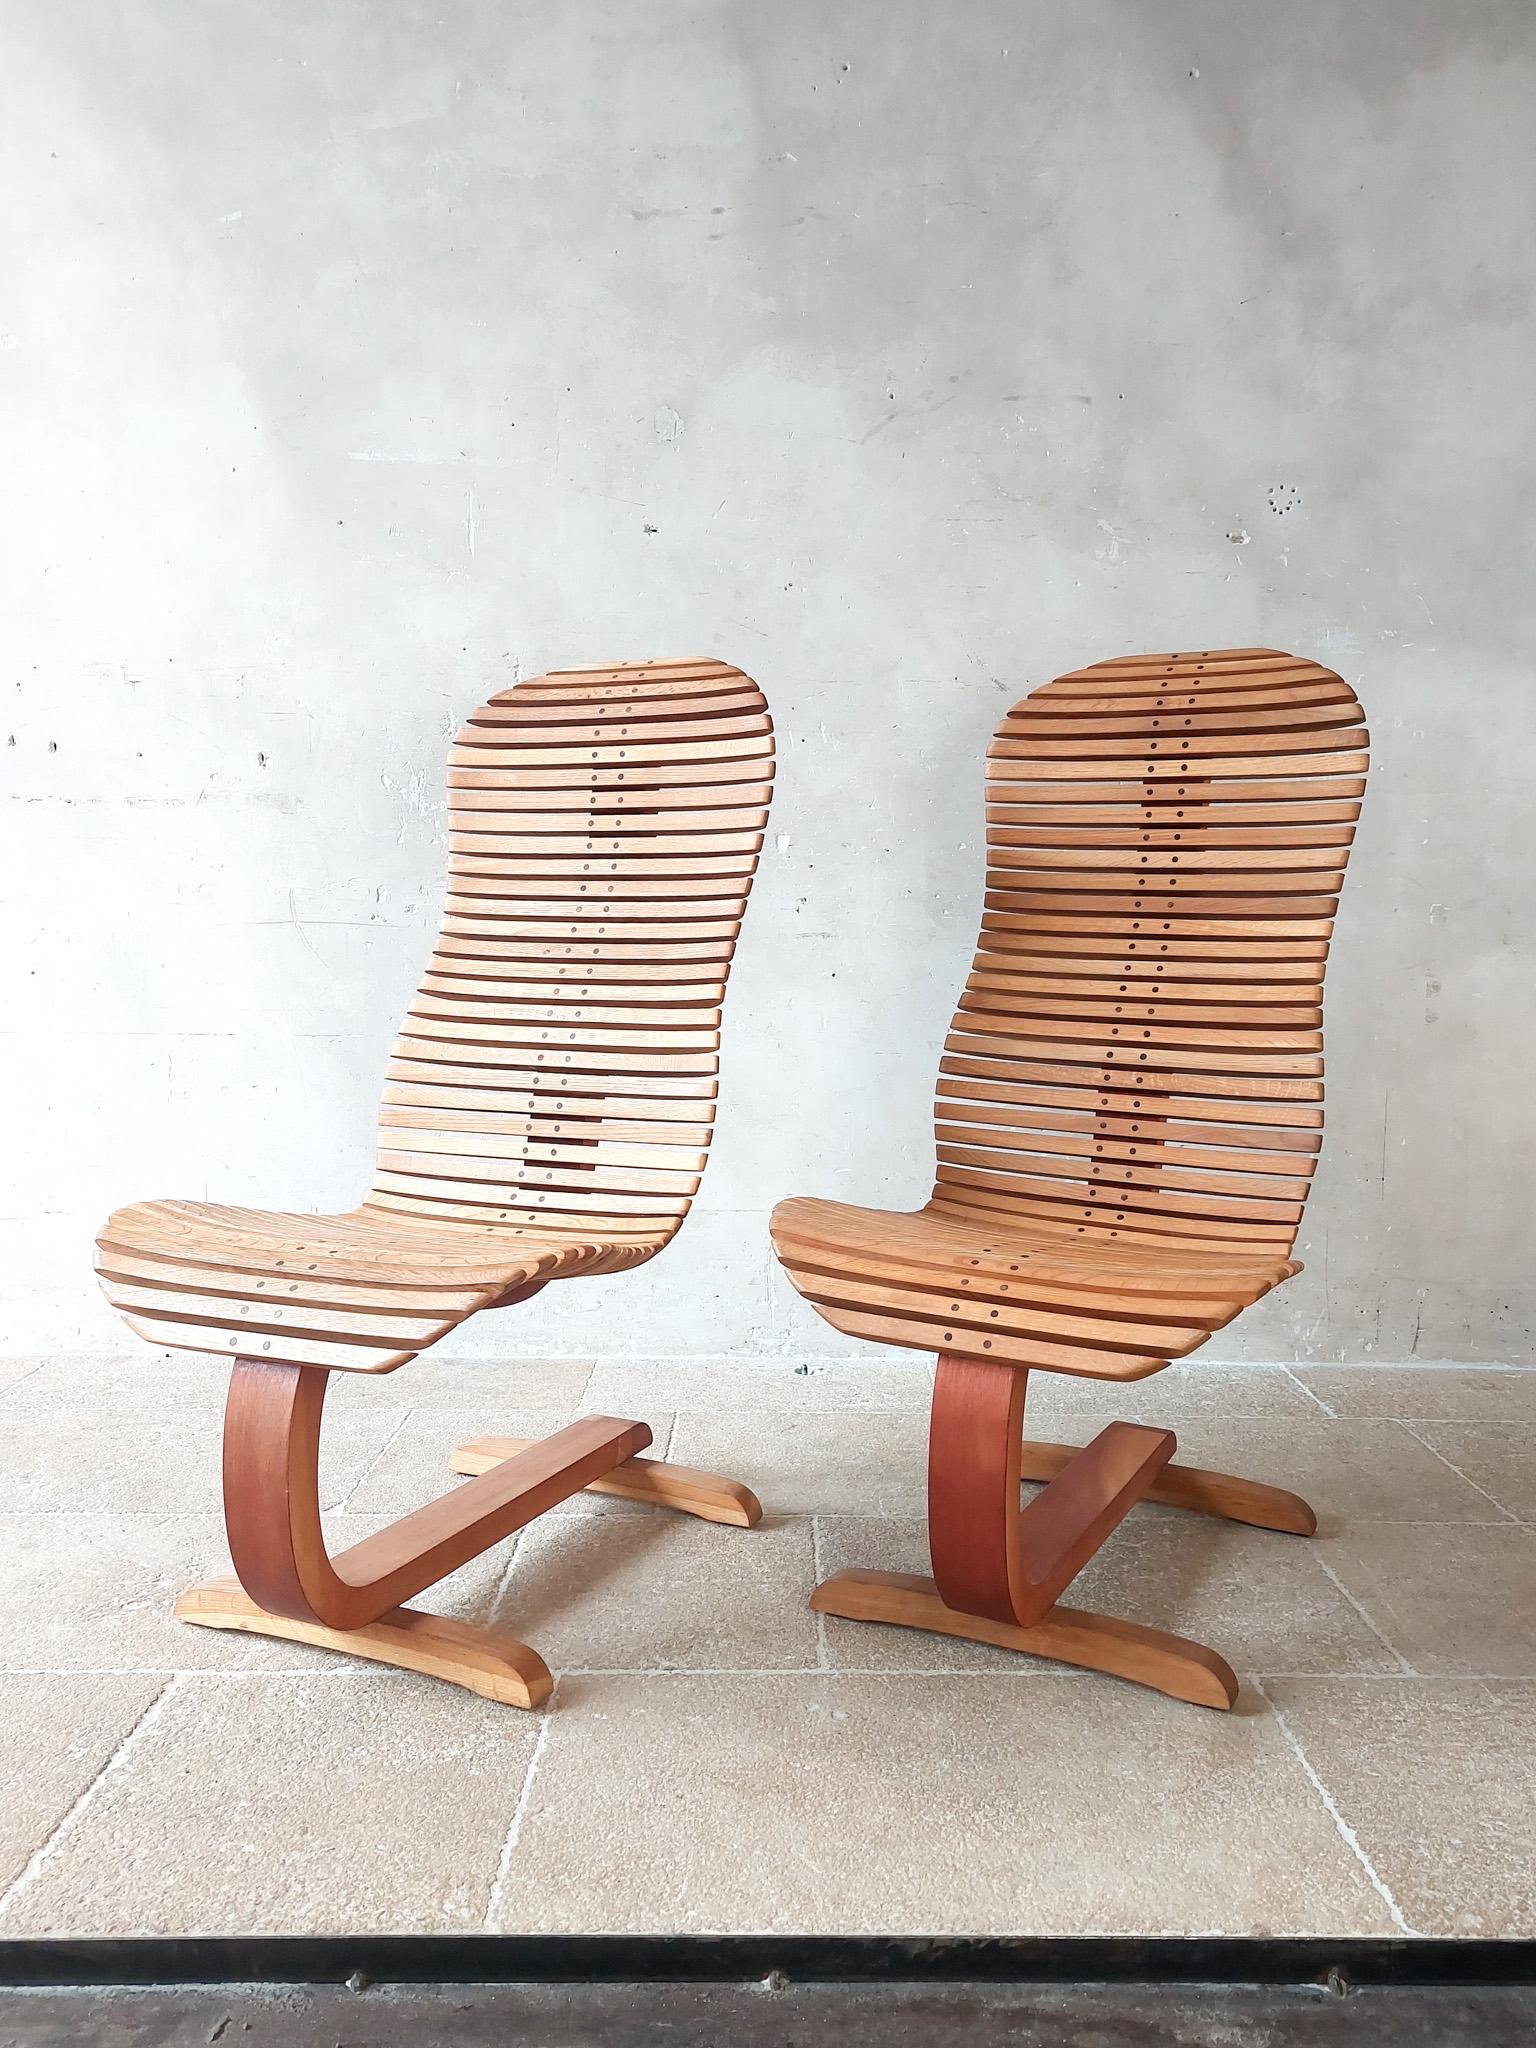 A pair of designer wooden lounge chairs, crafted with precision and style. Originating from Greece, these chairs are constructed from oak and Sungkai wood, showcasing their natural beauty and durability.

With their captivating organic shapes, these